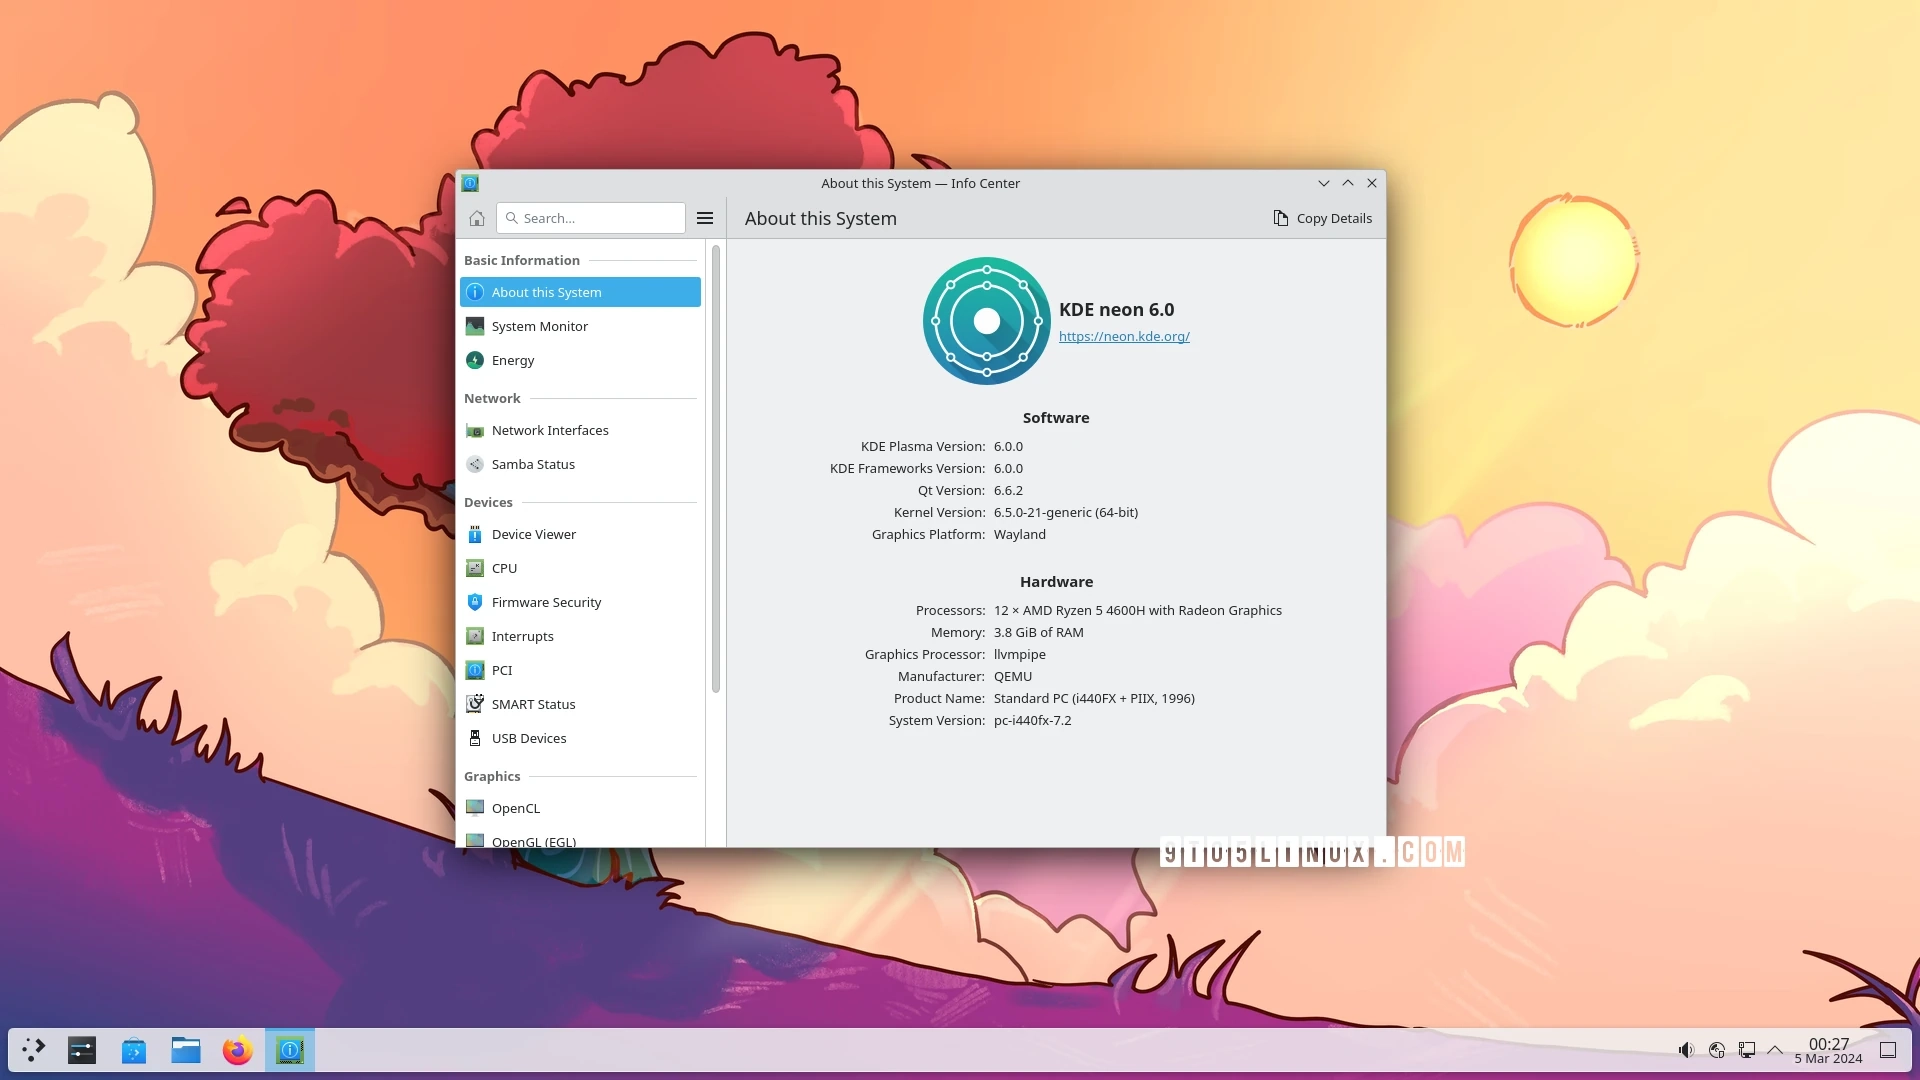 Introducing KDE Plasma 6.0.1: An Update Enhancing Overview Effect and Bug Fixes